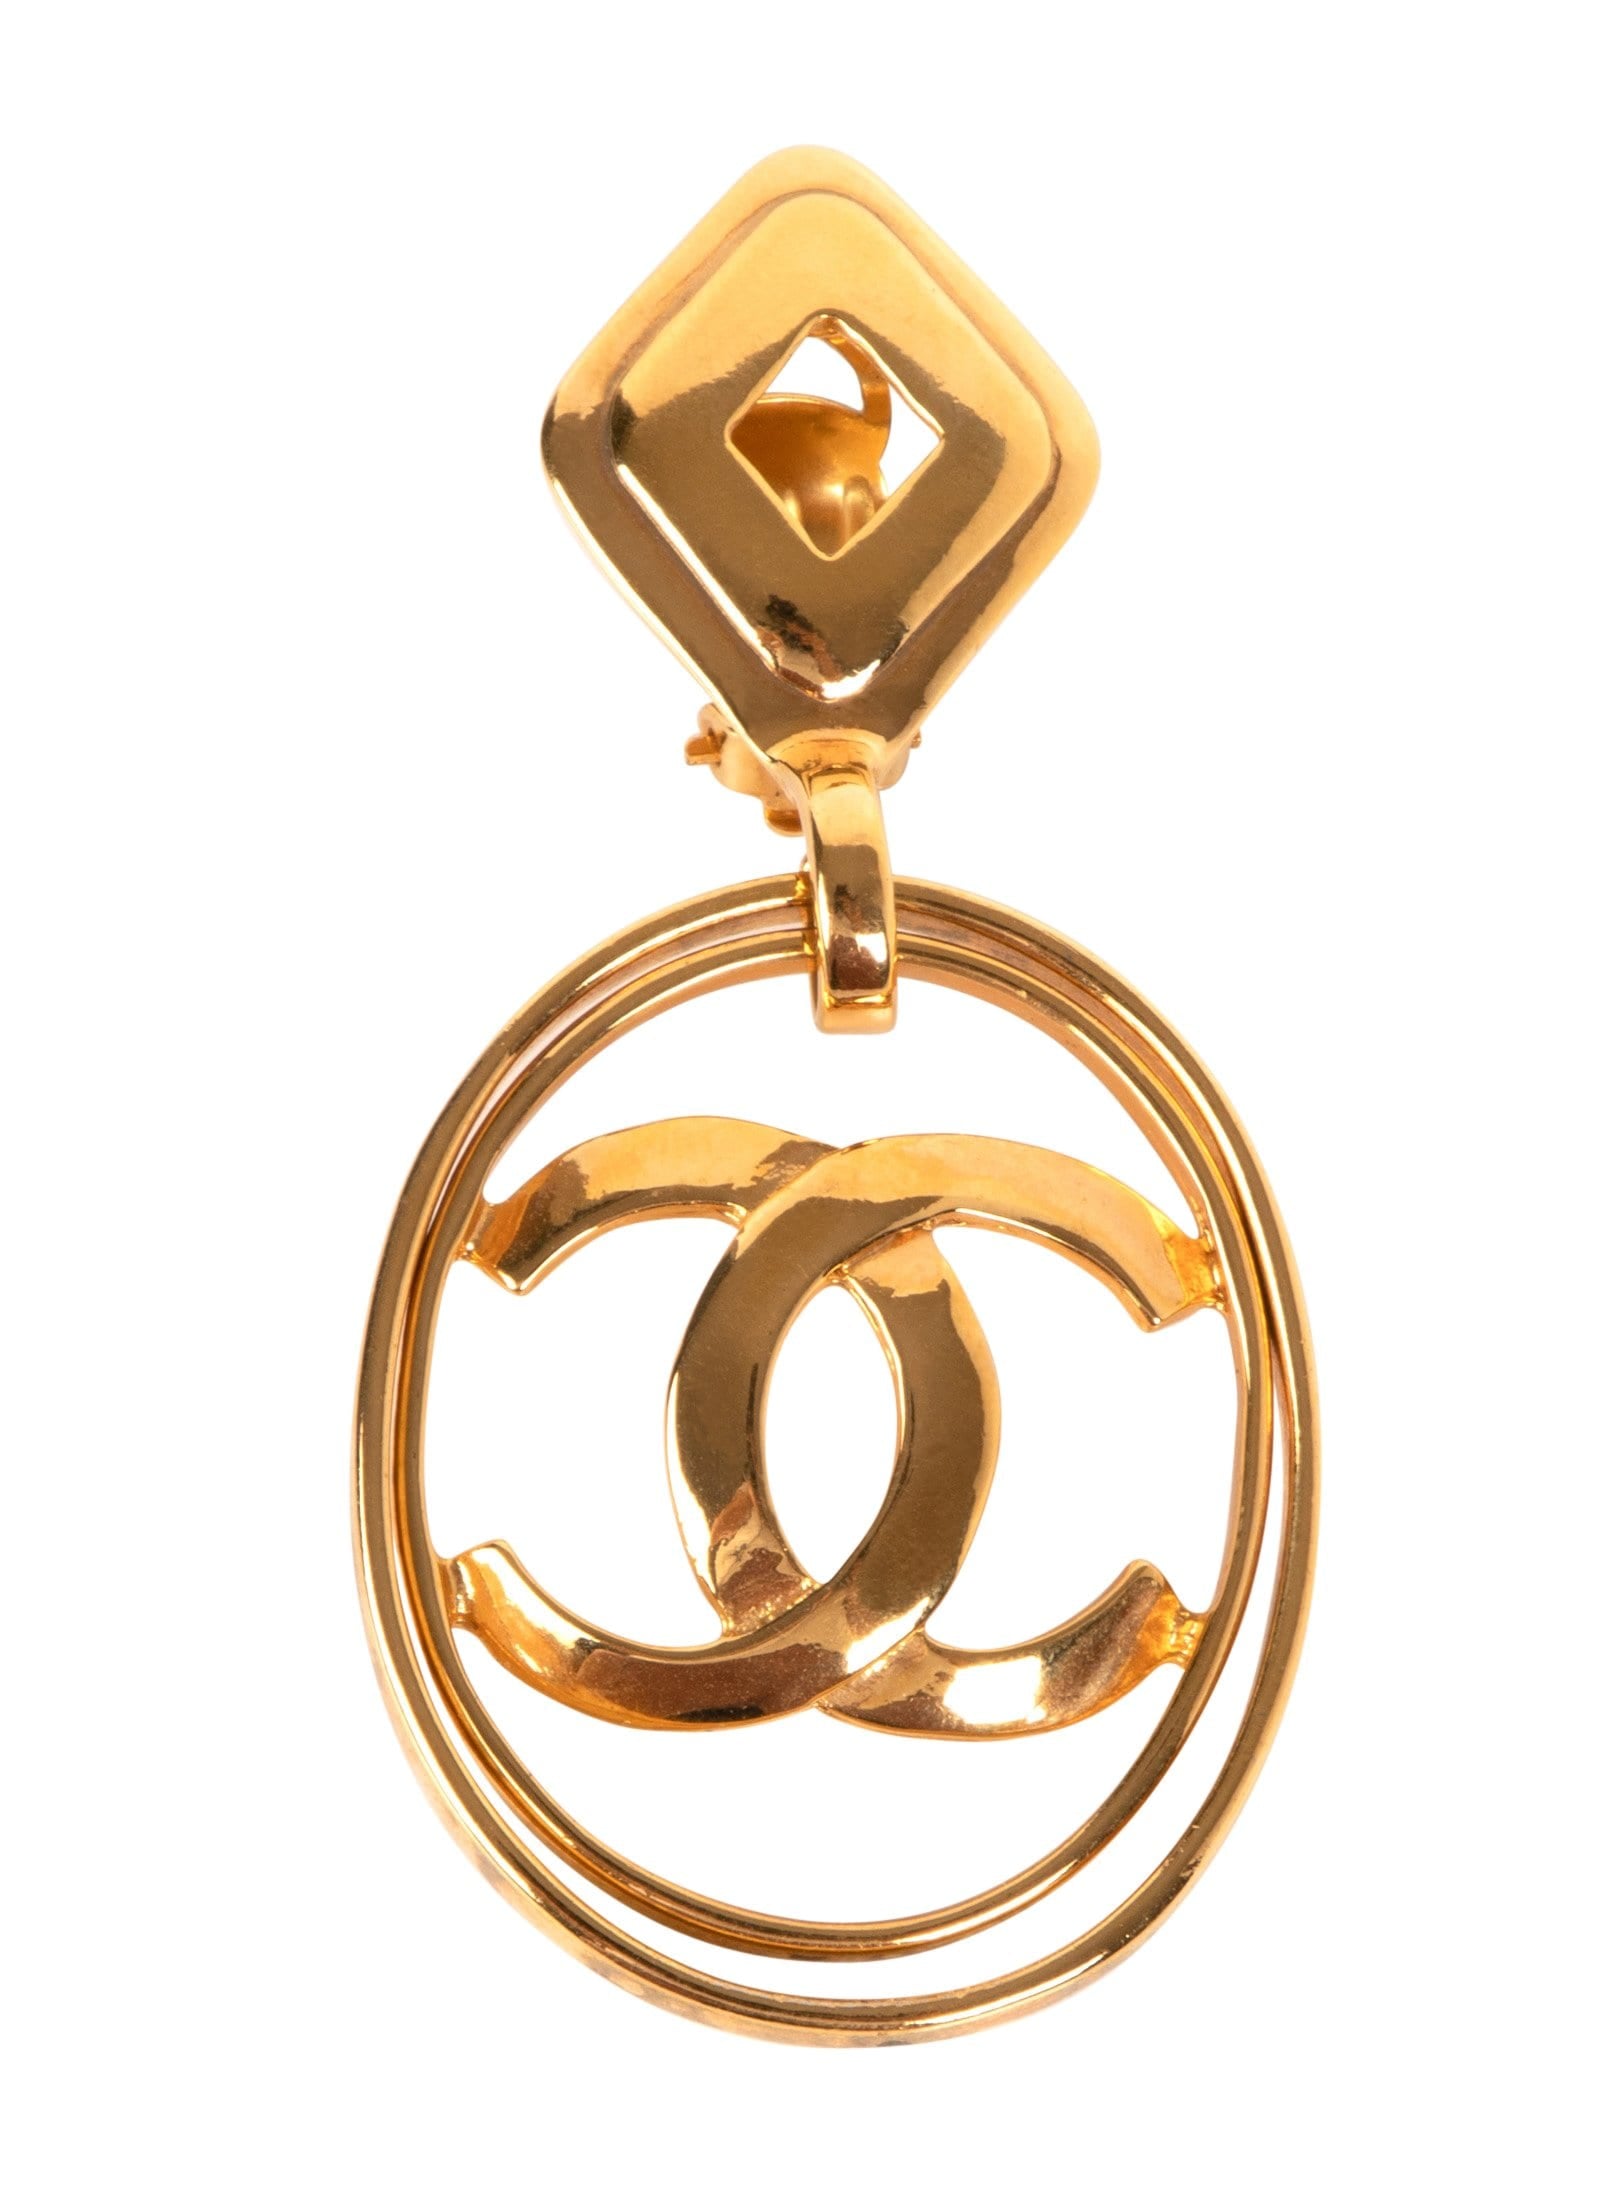 Vintage Gold Plated Chanel Stud Earring